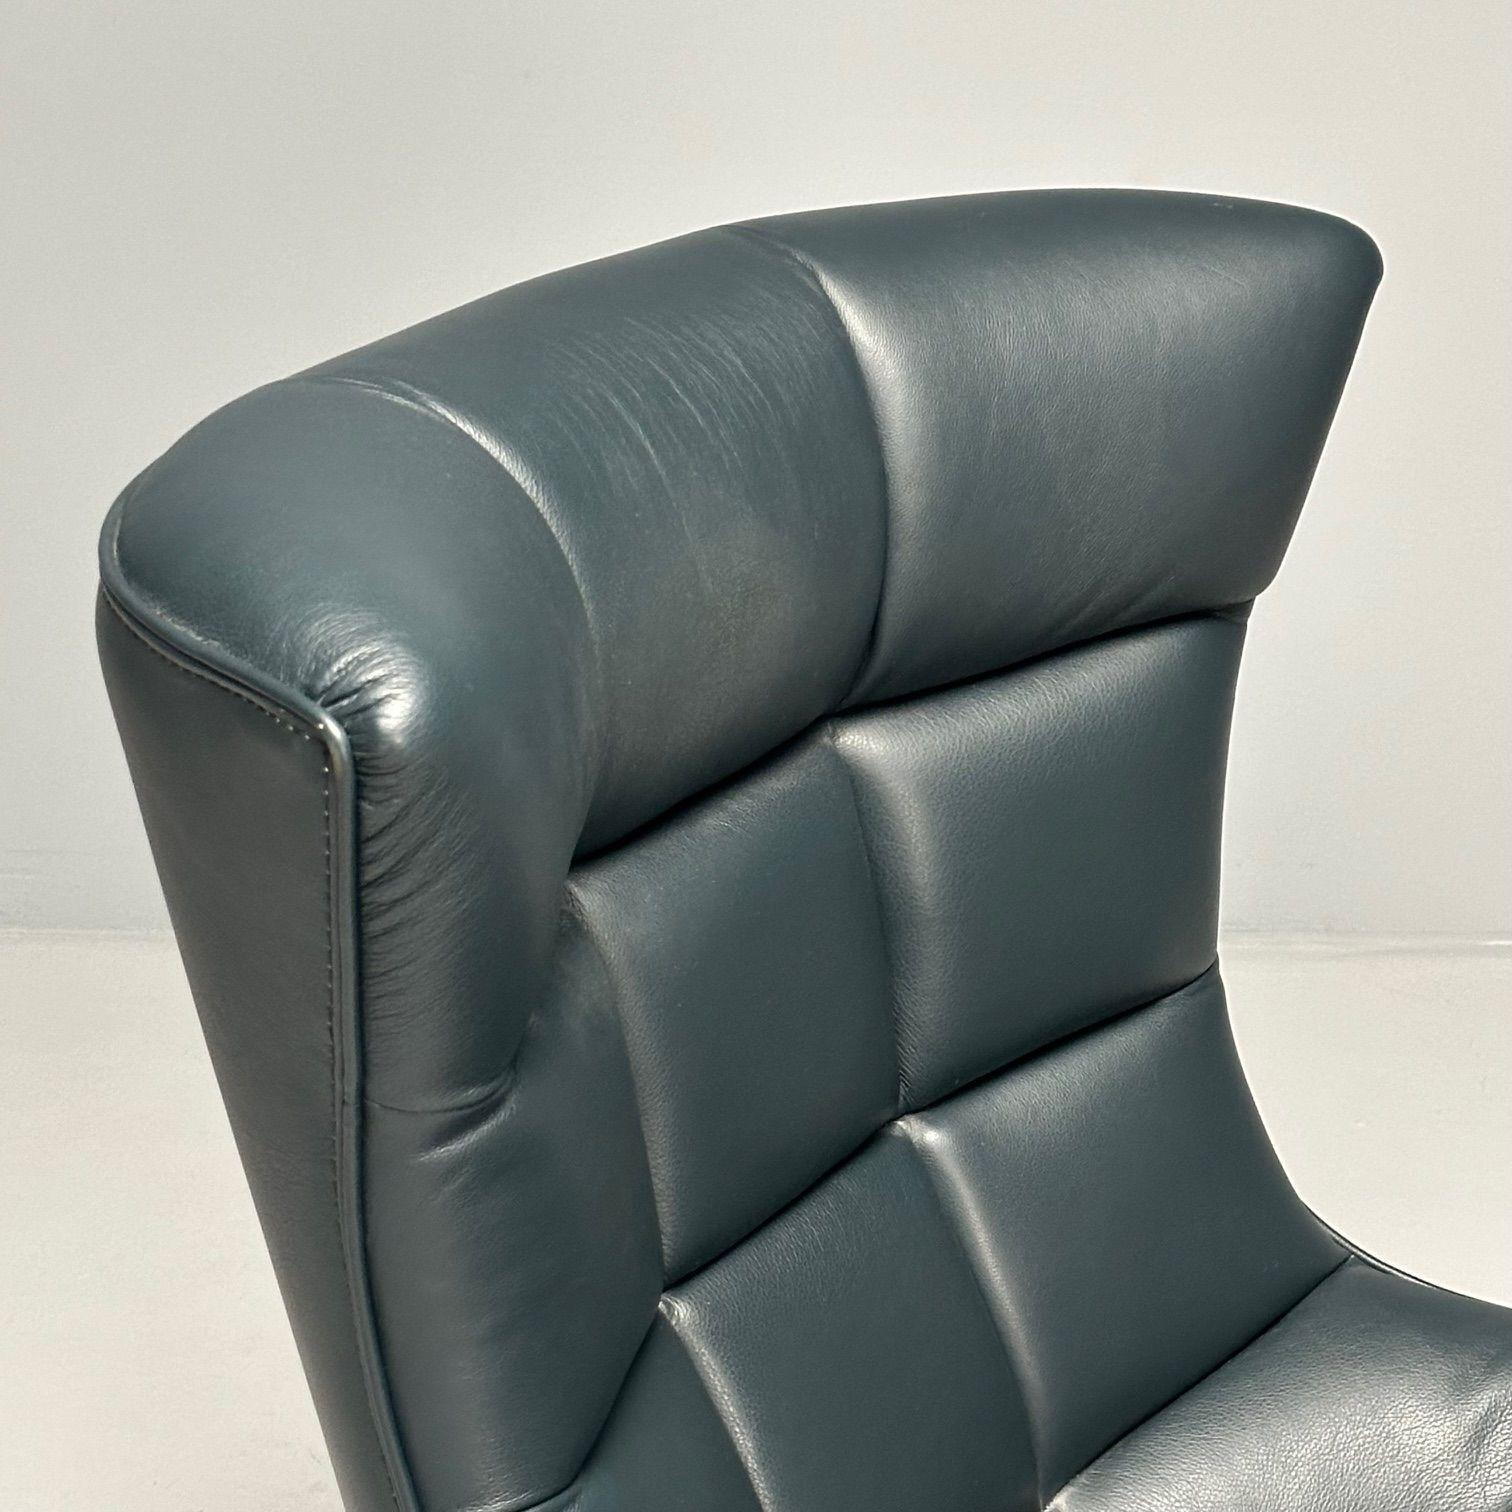 Contemporary Giuseppe Nicoletti, Modern, Office Chair, Blue Leather, Stainless Steel, 2010s